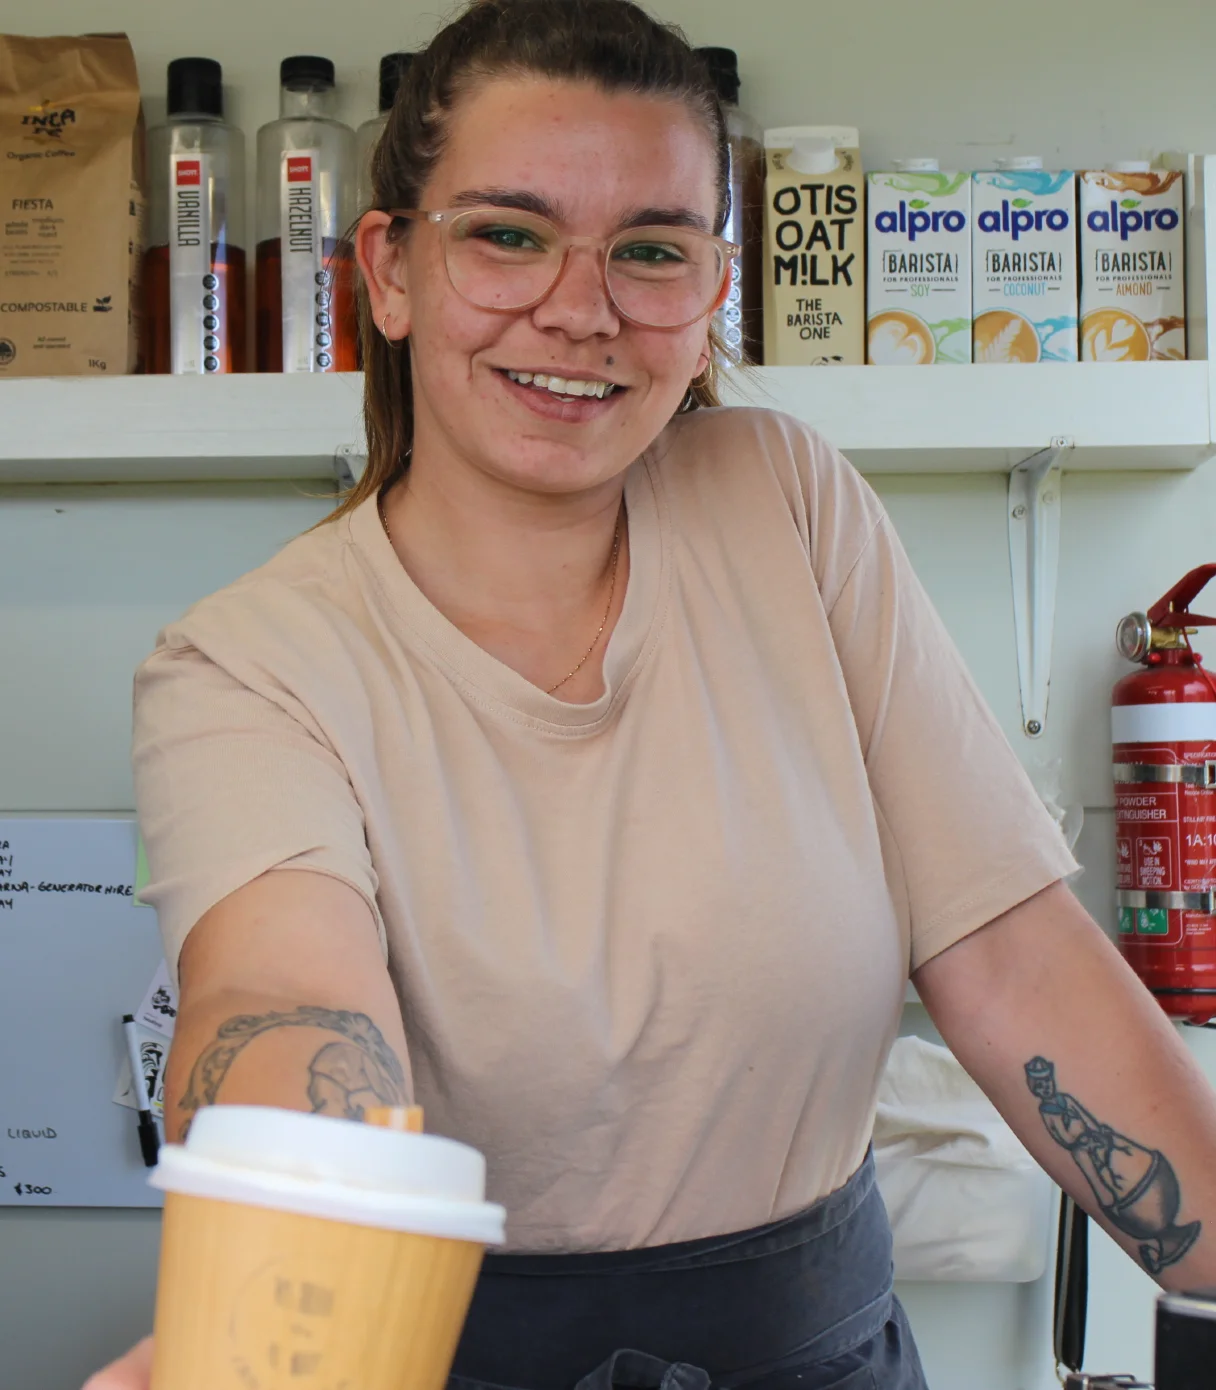 Fair Grinds Co. owner Kahli holding out a fresh cup of coffee.